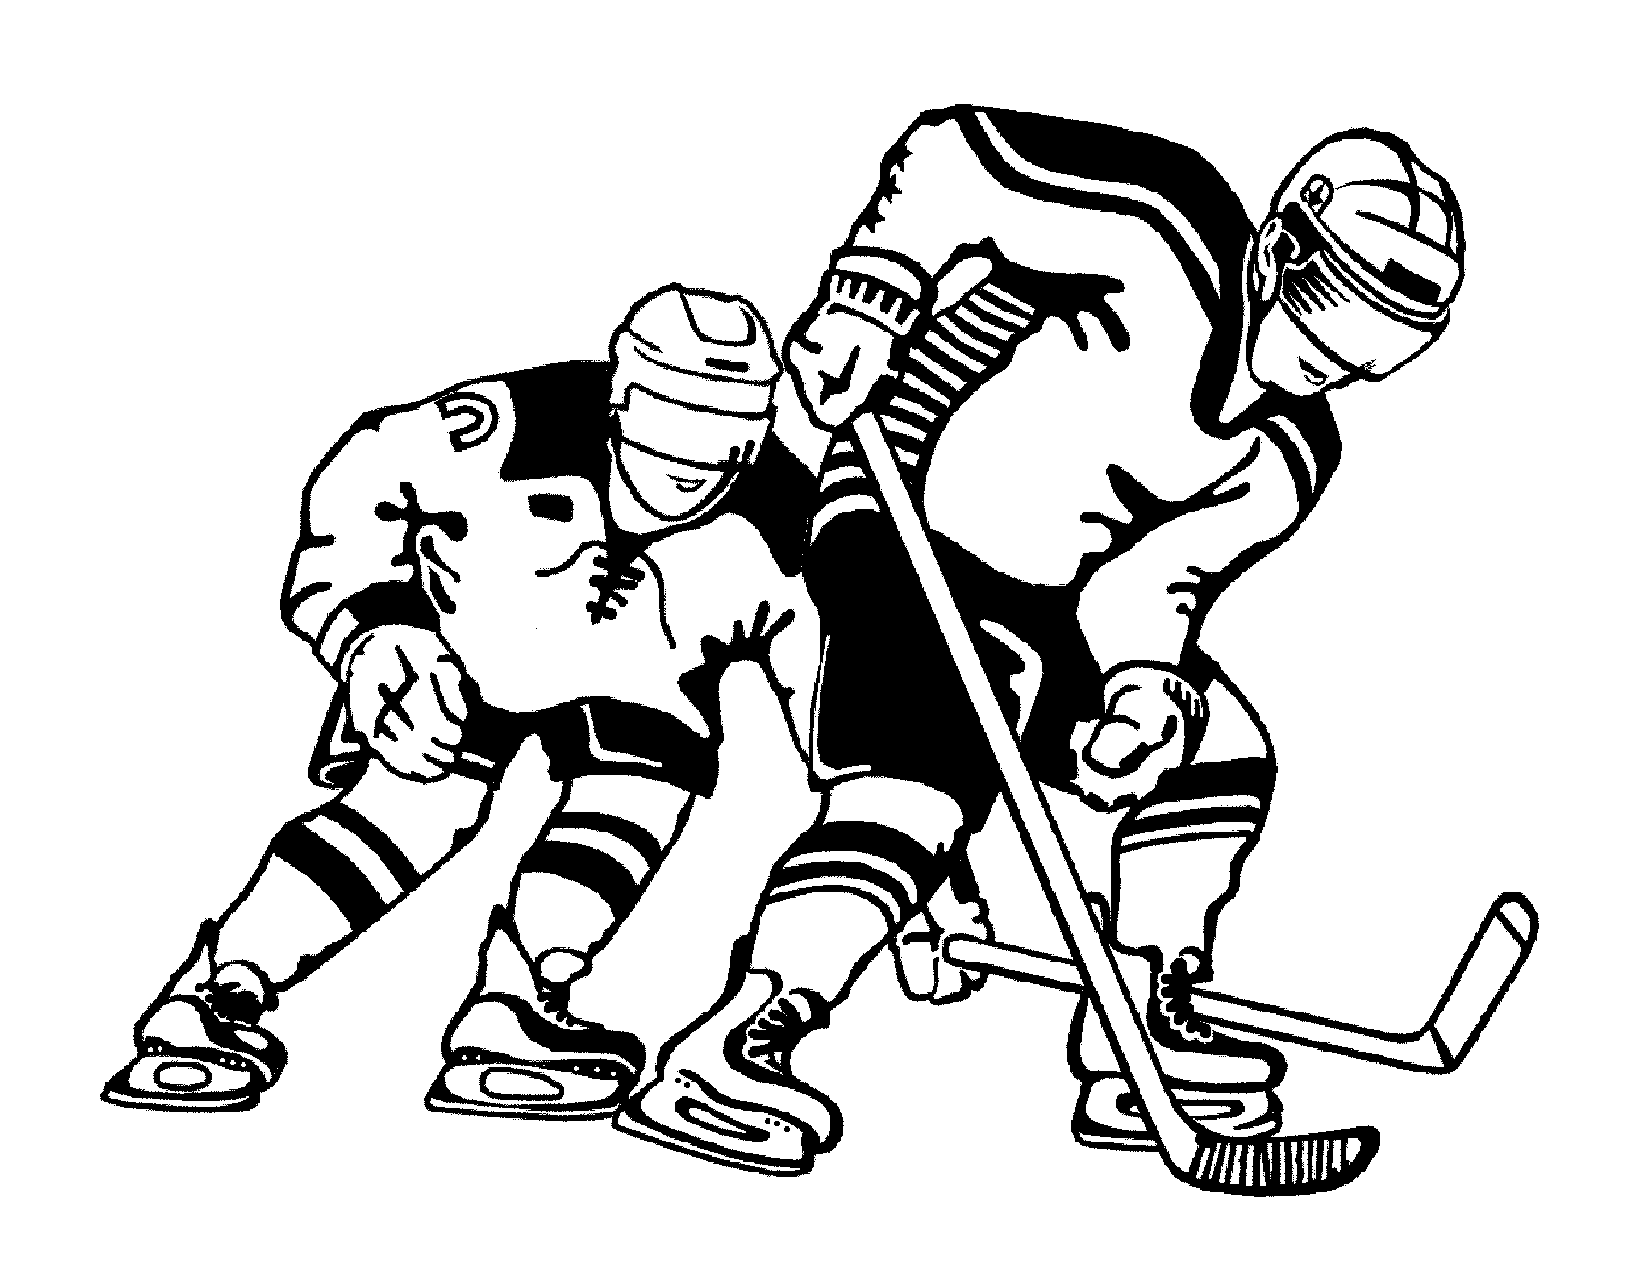 Sorry the coloring sheet didn't load, it can also be found
      on my Facebook Page at fb.me/goaliepow